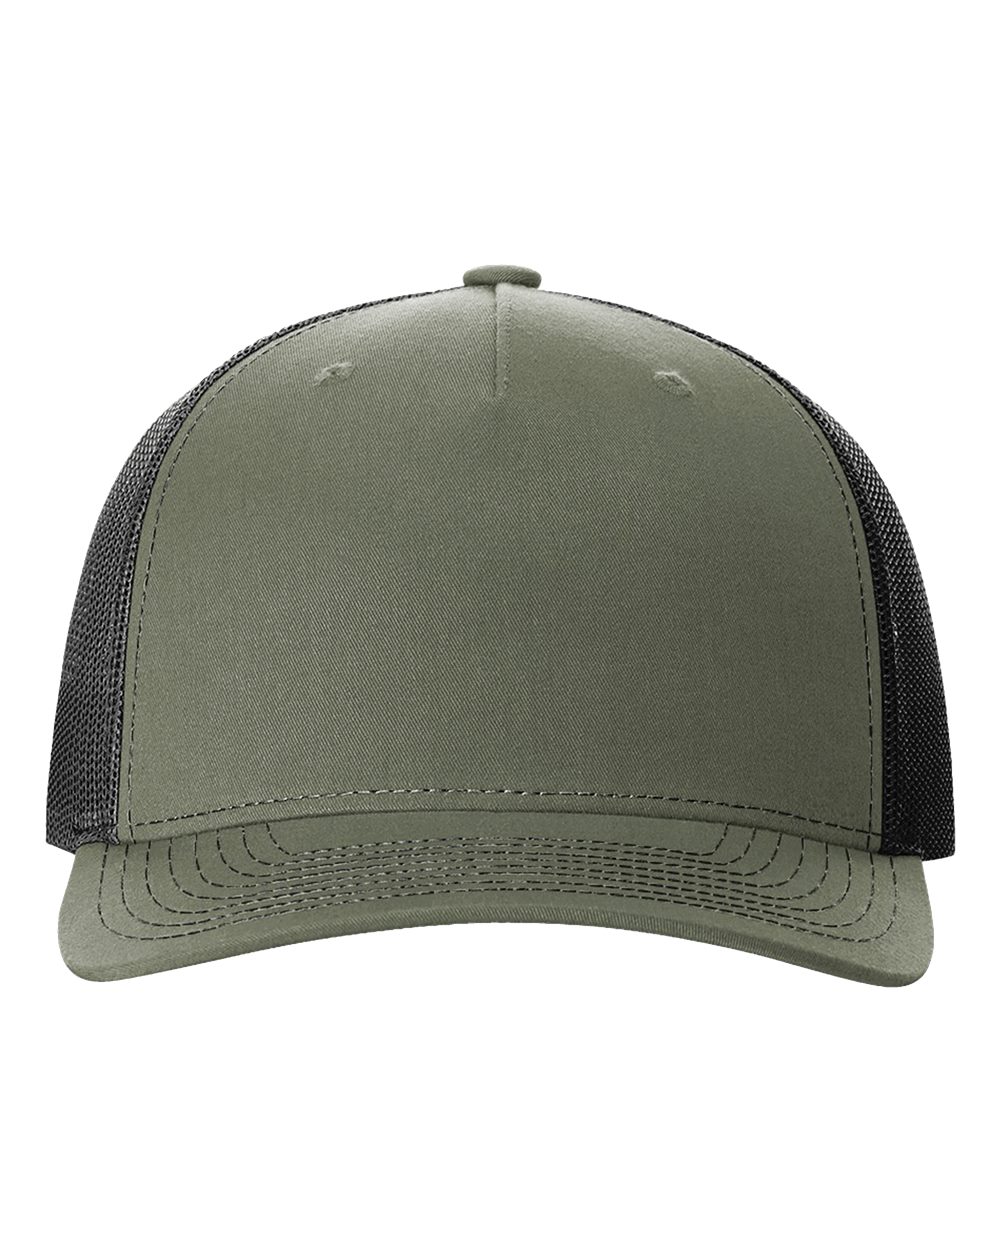 click to view Loden Green/ Black